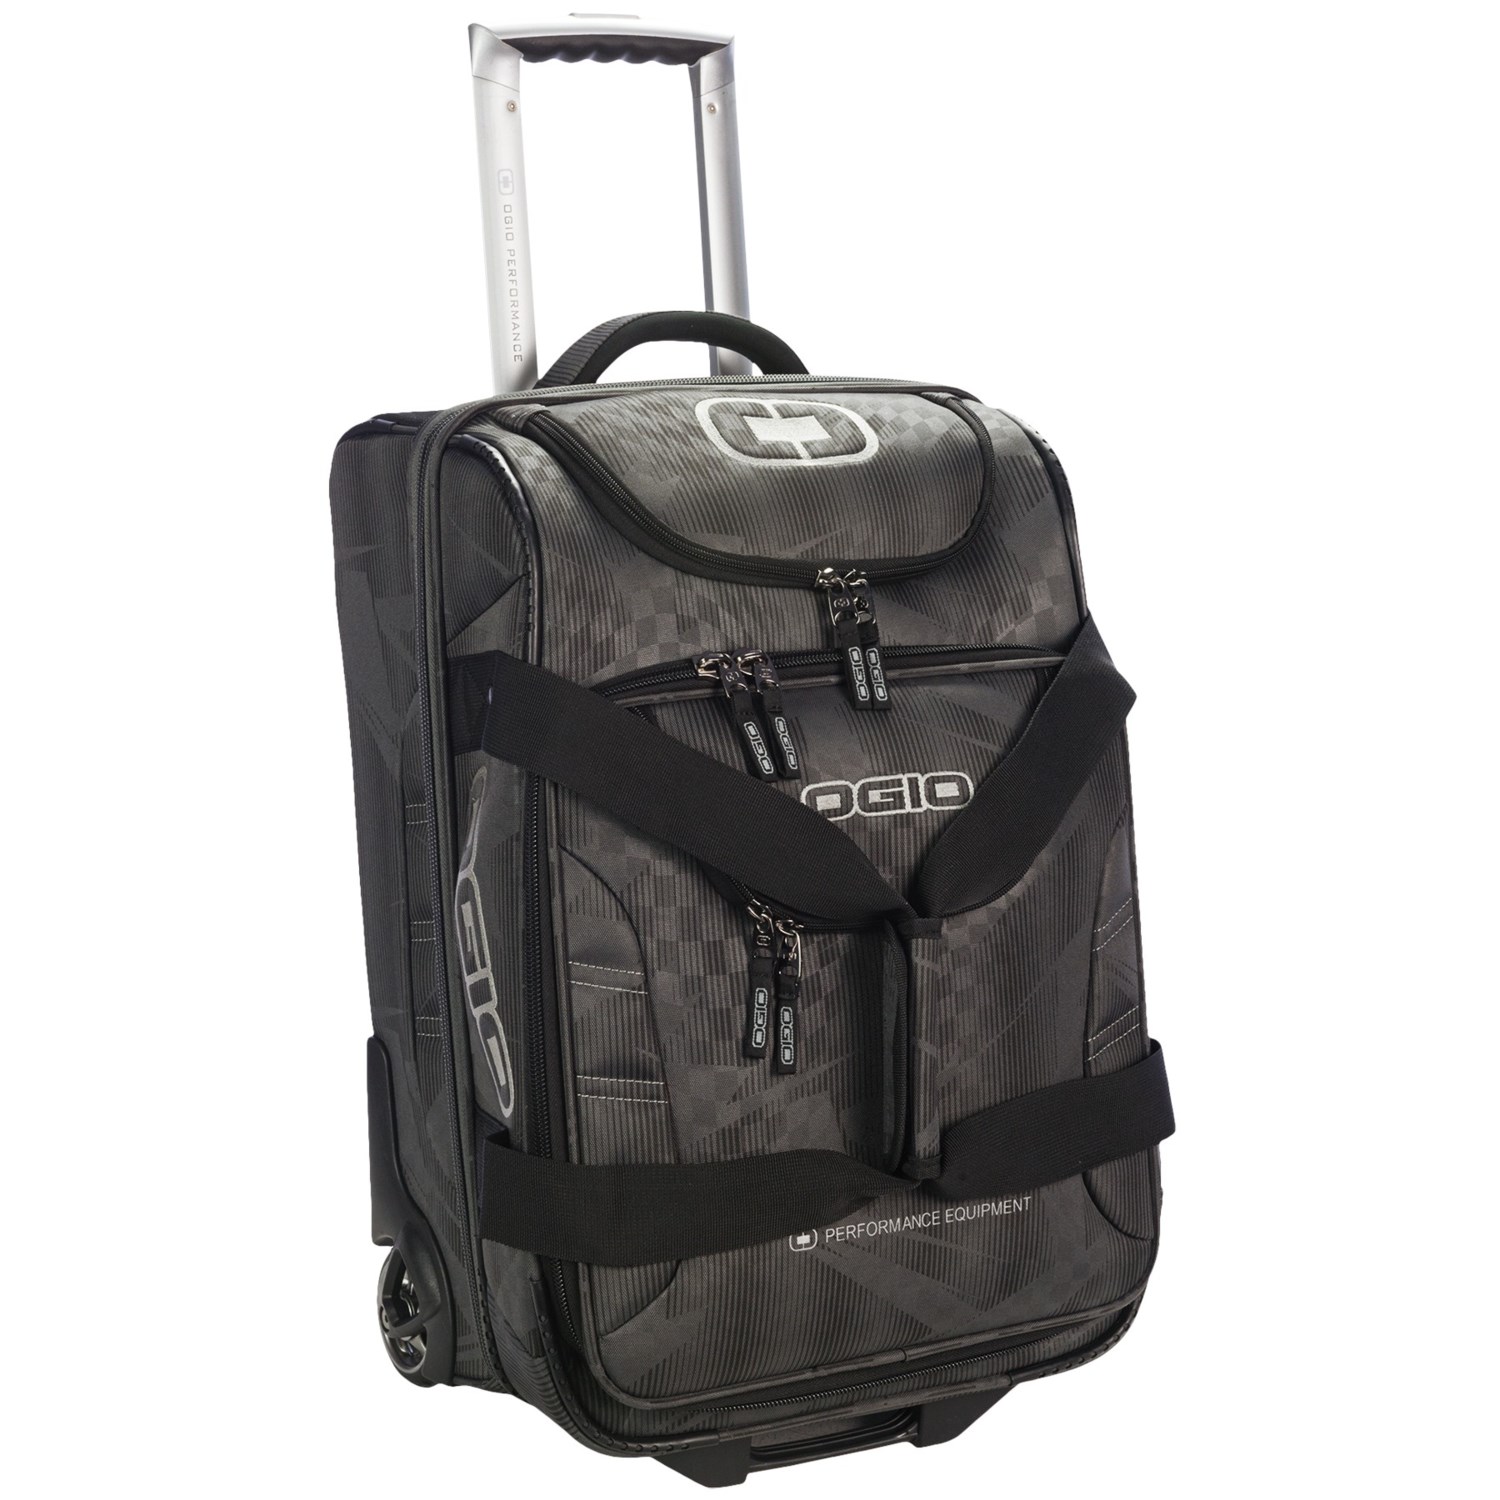 OGIO Ascender Expandable Duffel Bag - Rolling Carry-On, 22” - Save 62%